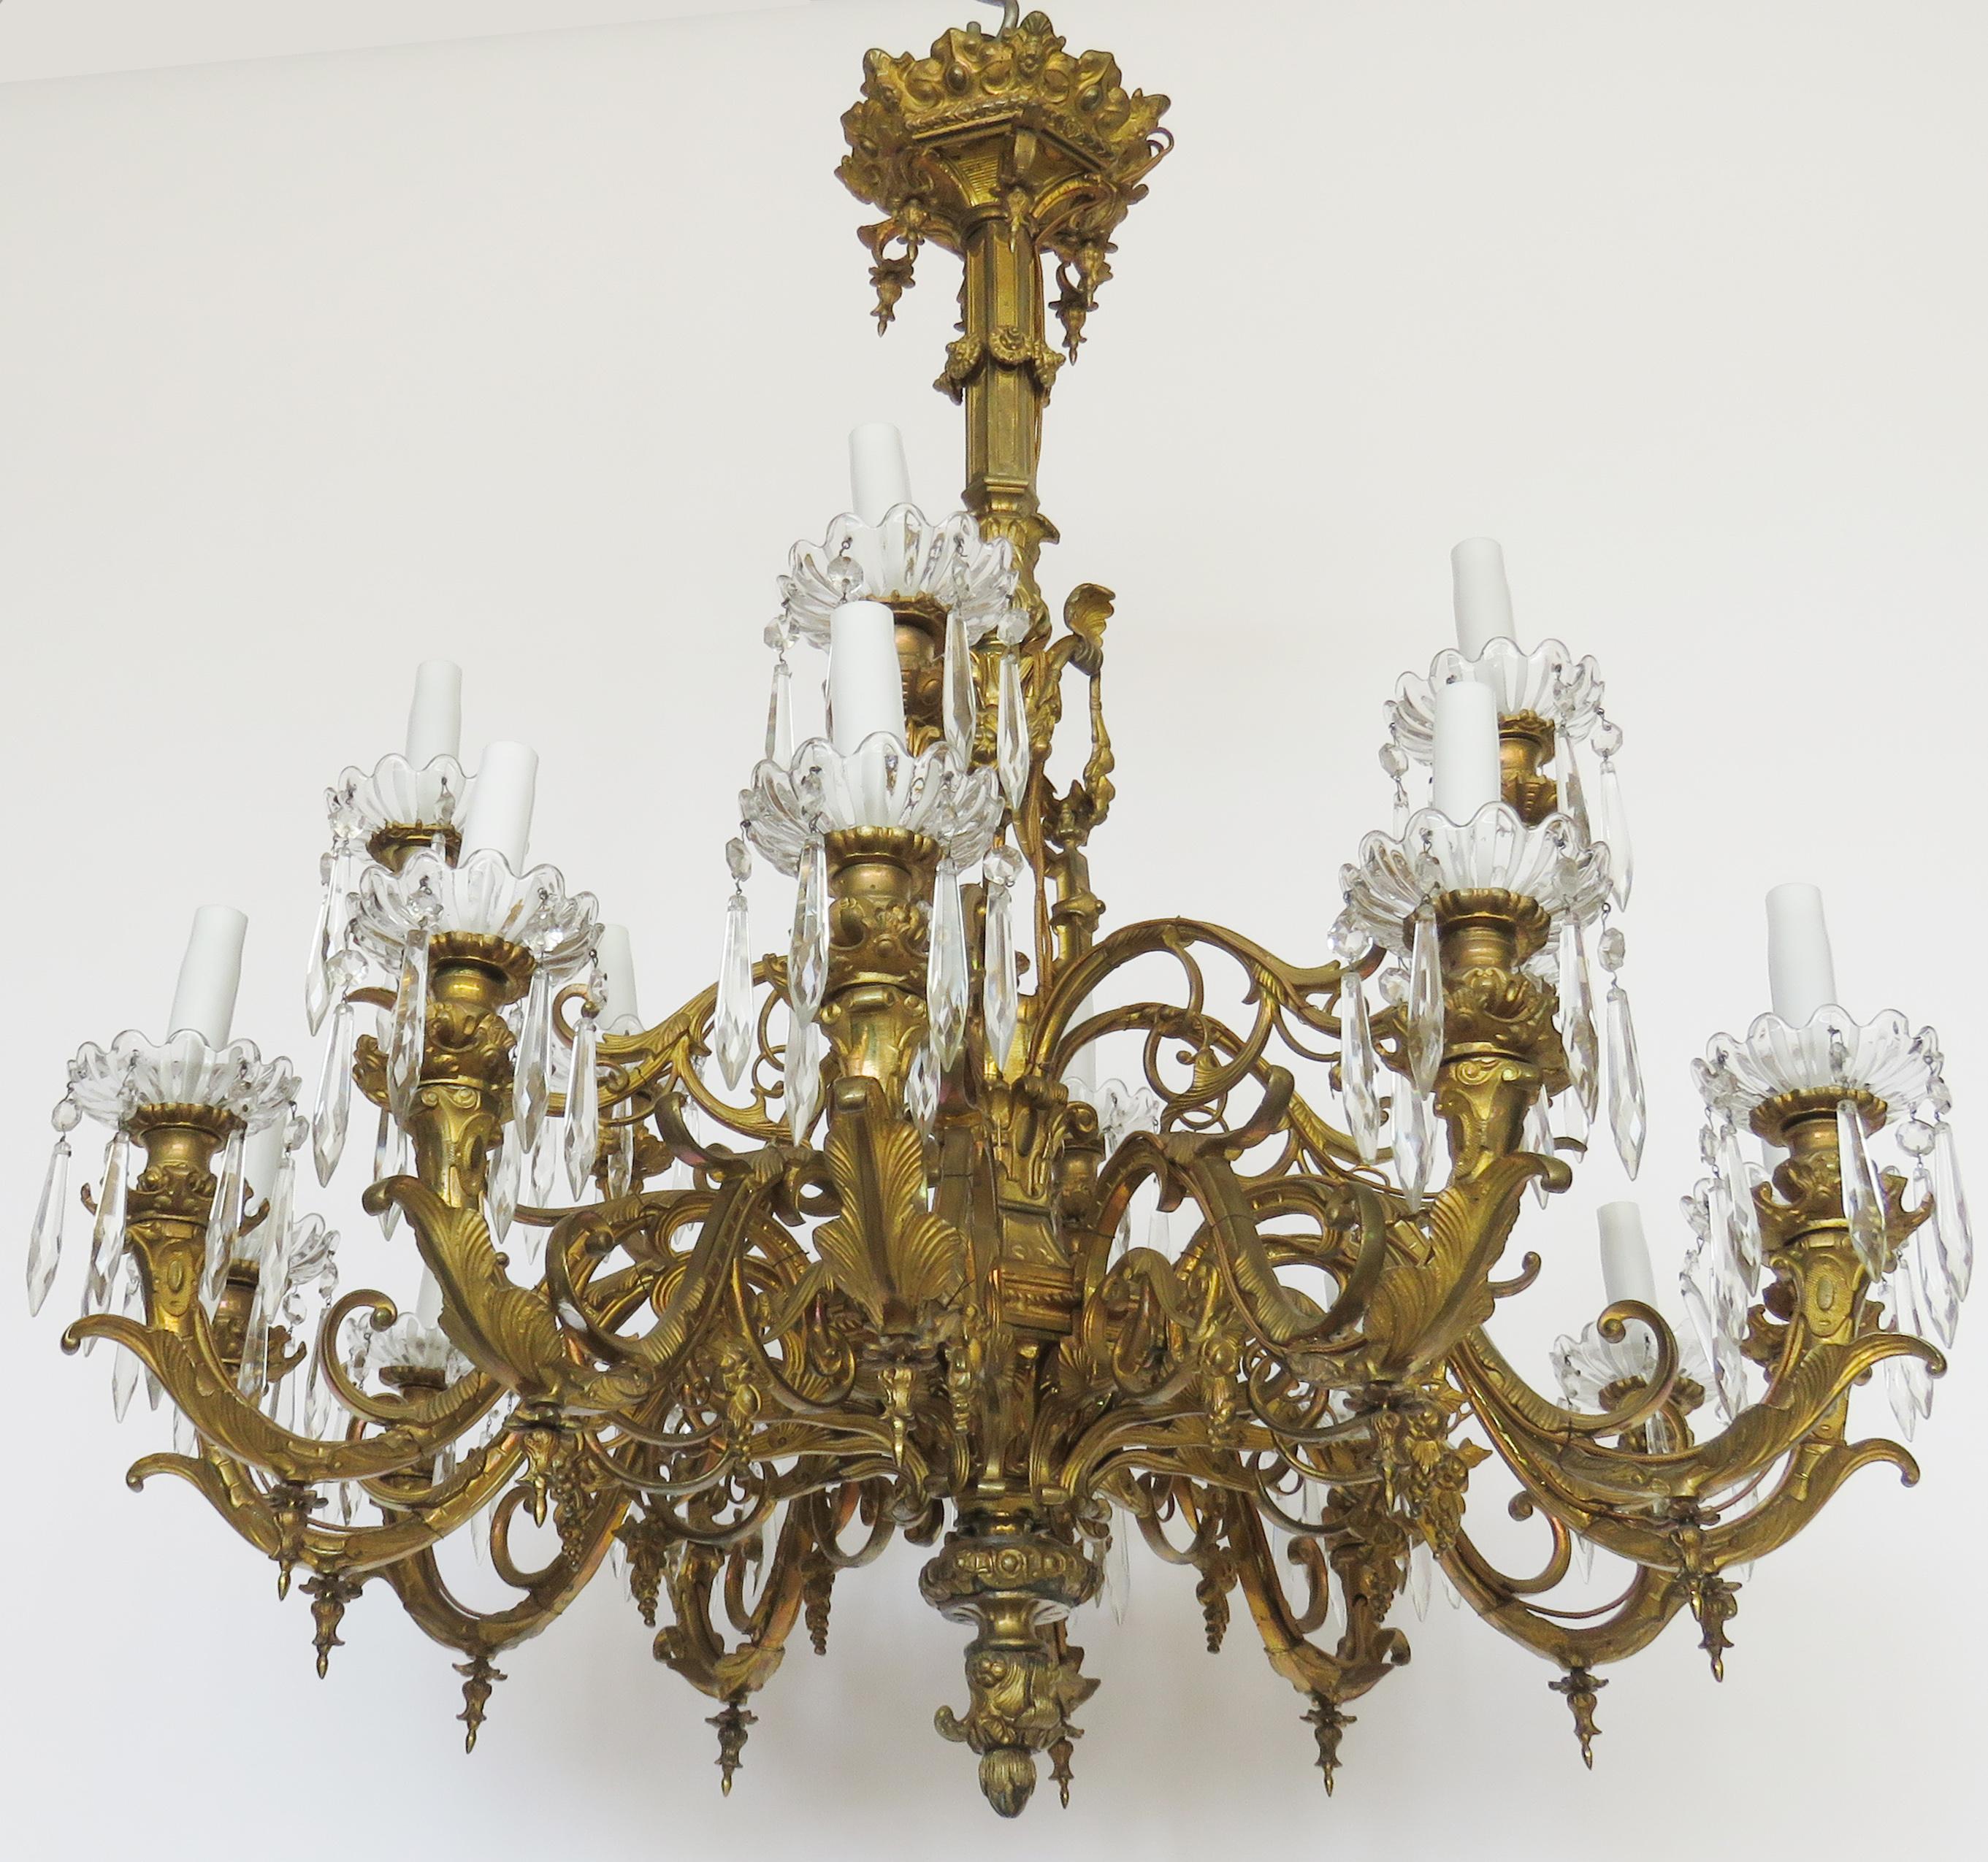 Gilt bronze chandelier, extensively decorated with scrolls and acanthus foliage, two-tier candle arms, lower 12 lights, upper 6 lights.